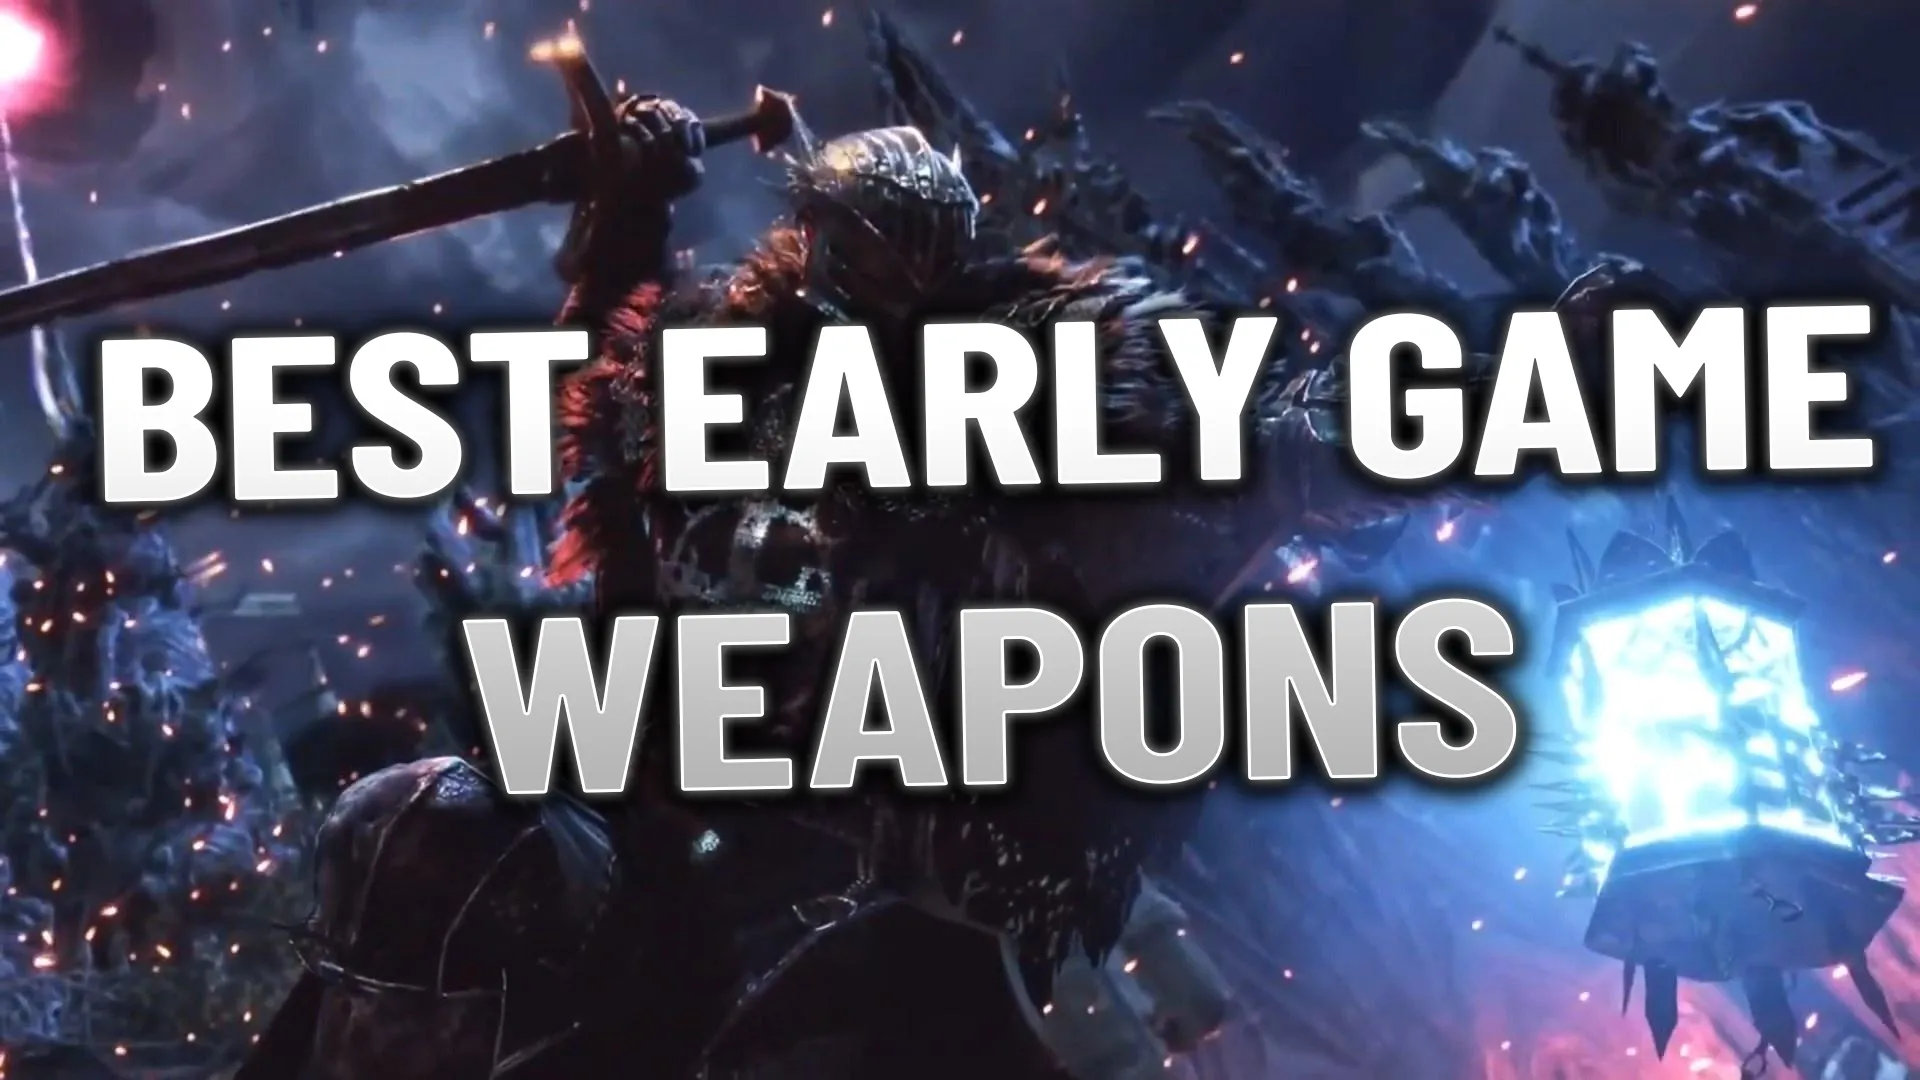 How to Use Ranged Weapons in Lords of the Fallen – GameSpew